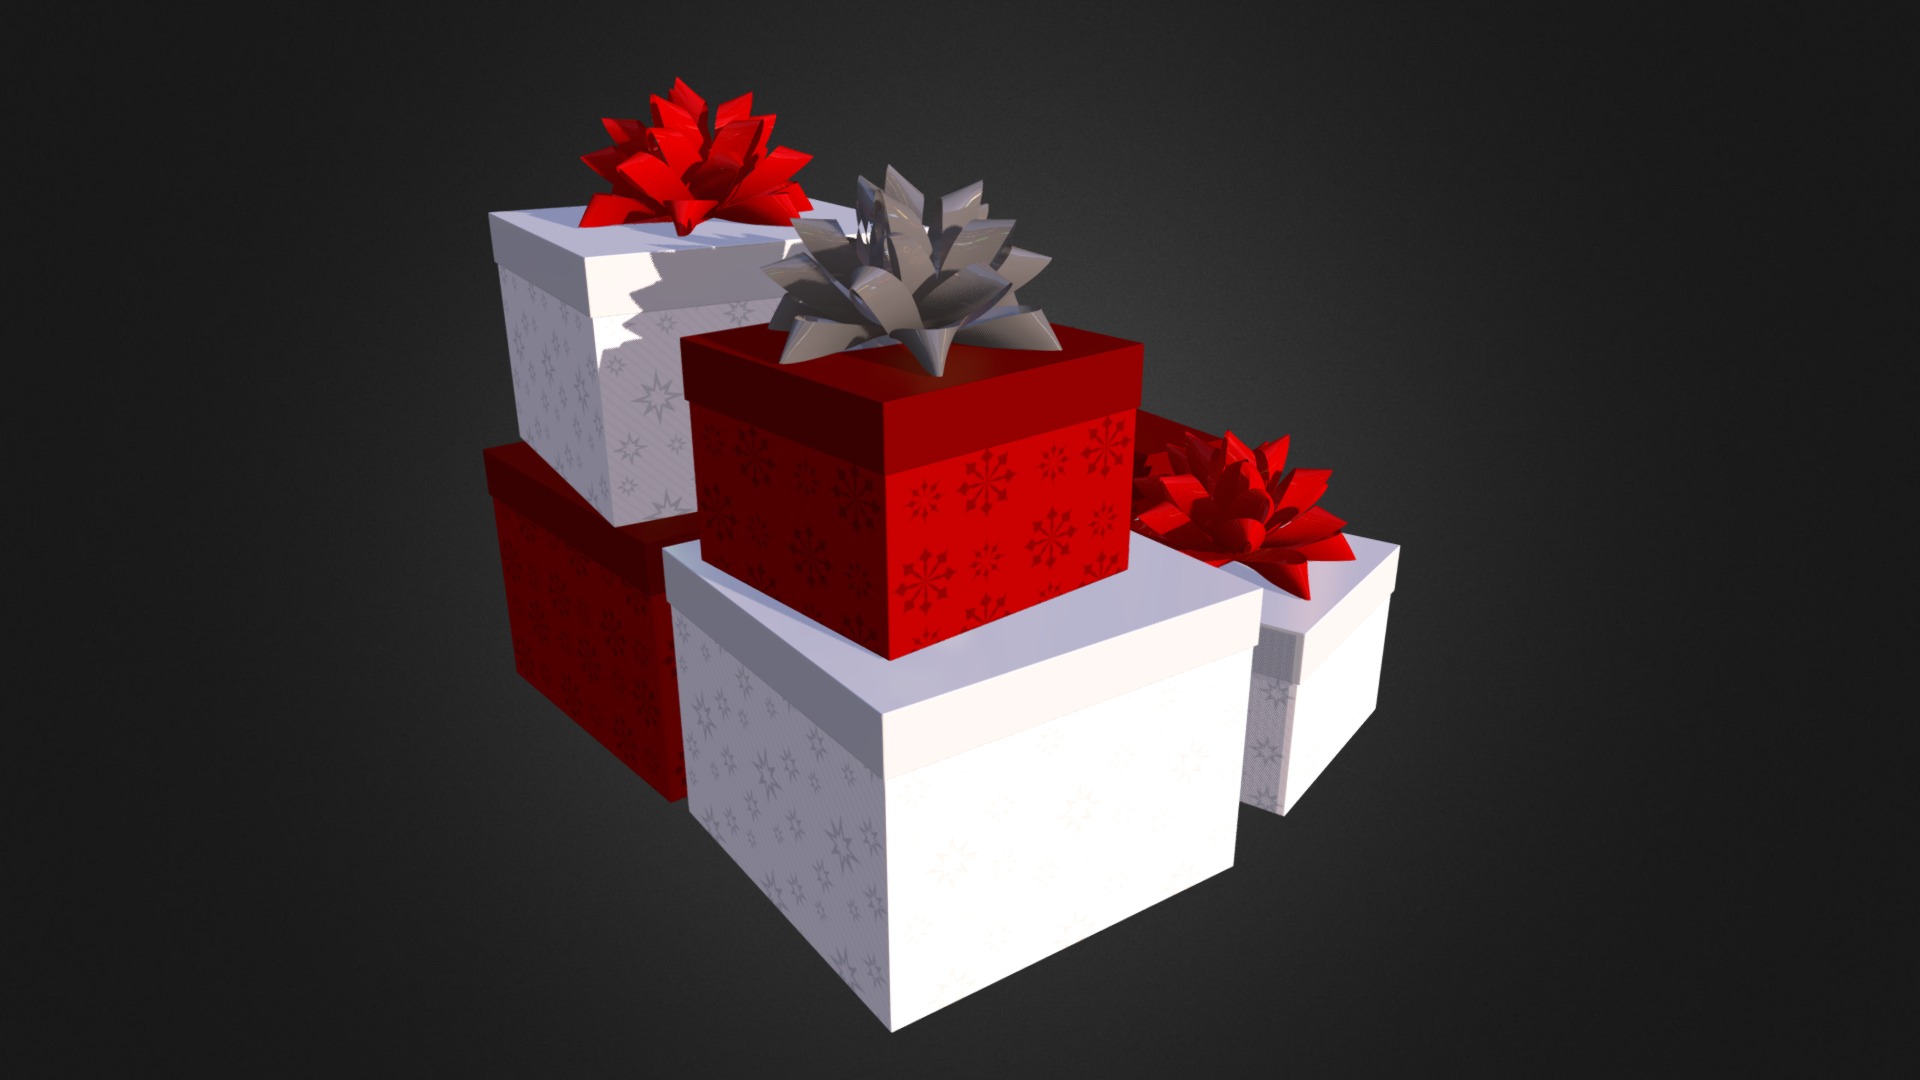 3D model Christmas Presents 4 - This is a 3D model of the Christmas Presents 4. The 3D model is about a red and white gift box.